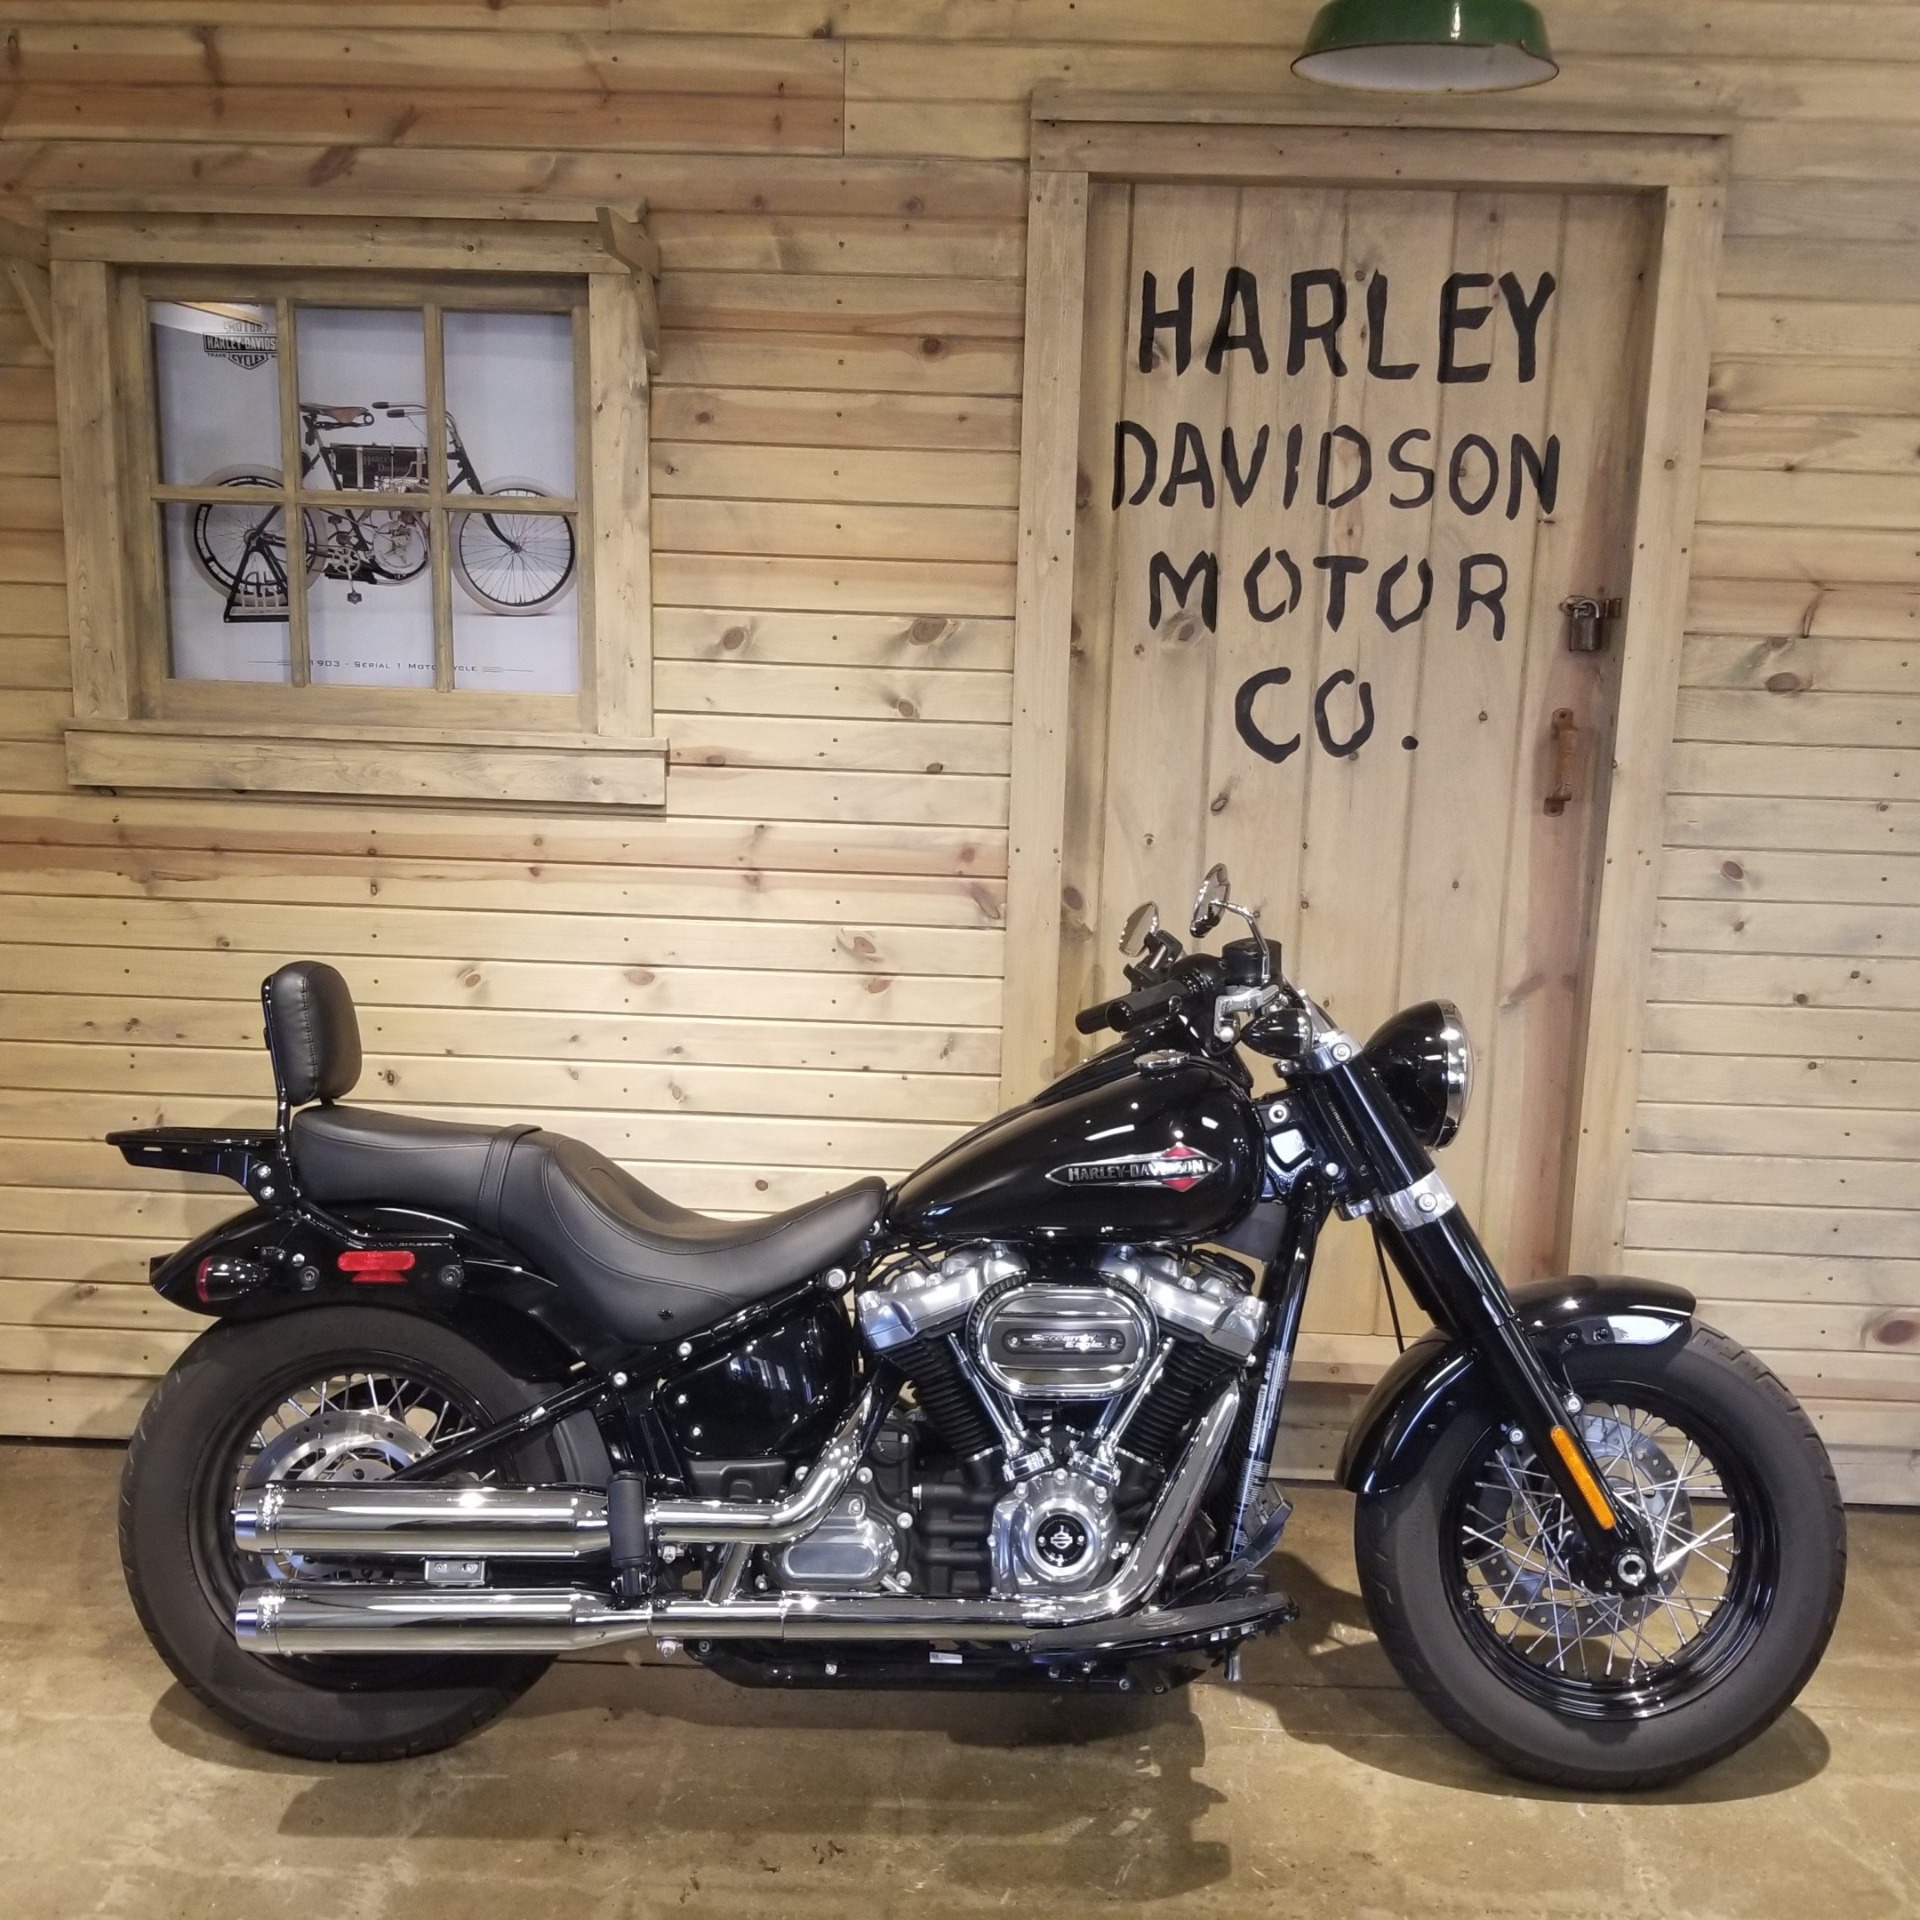 Used 2018 Harley Davidson Softail Slim 107 Motorcycles In Mentor Oh Stock Number 18 0518016